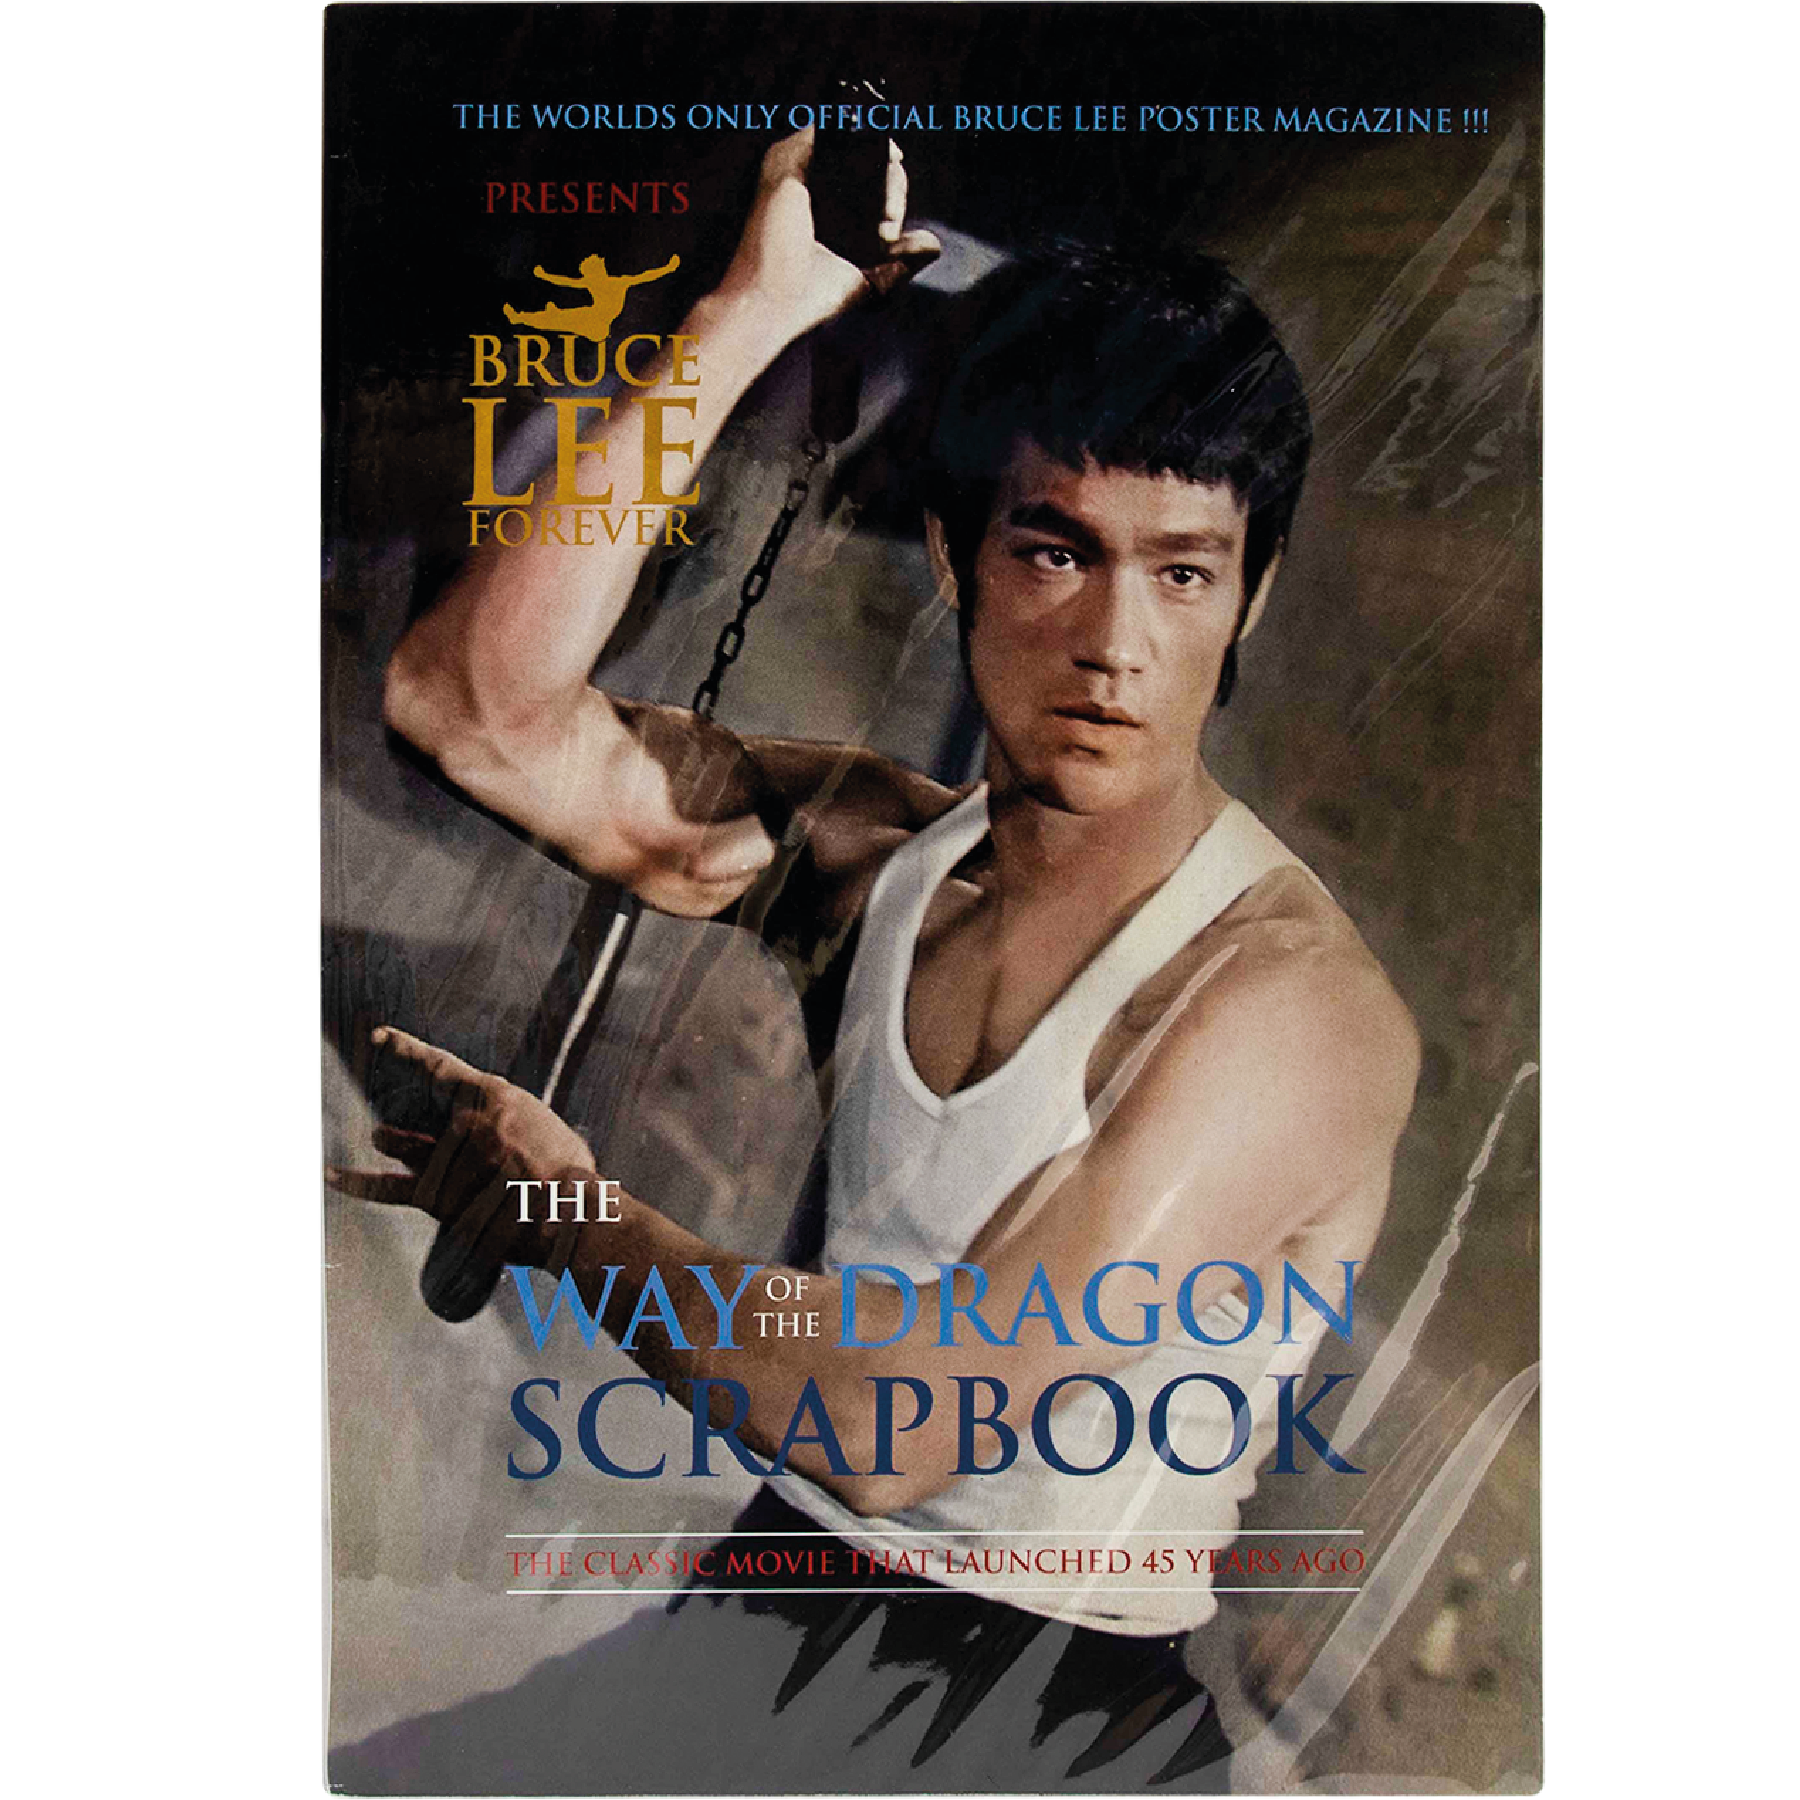 Bruce Lee Forever - The Way of The Dragon Scrapbook – Bruce Lee Club